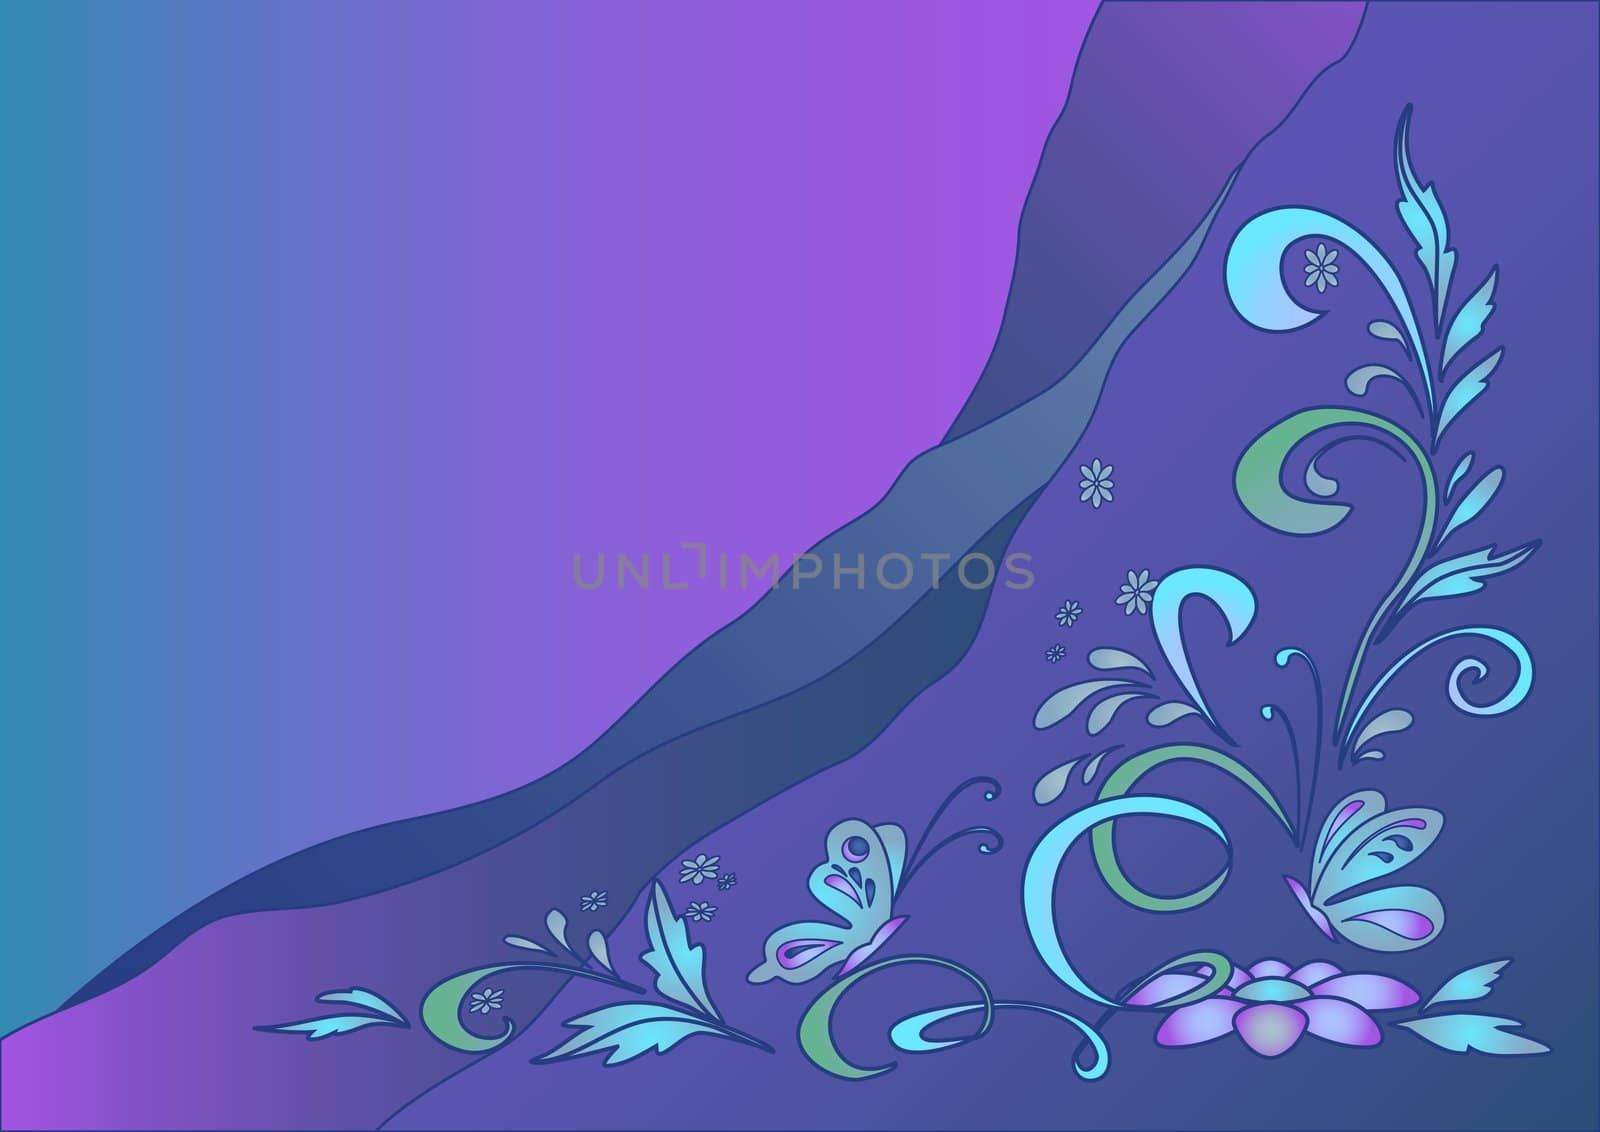 Abstract background with symbolical flowers and butterflies